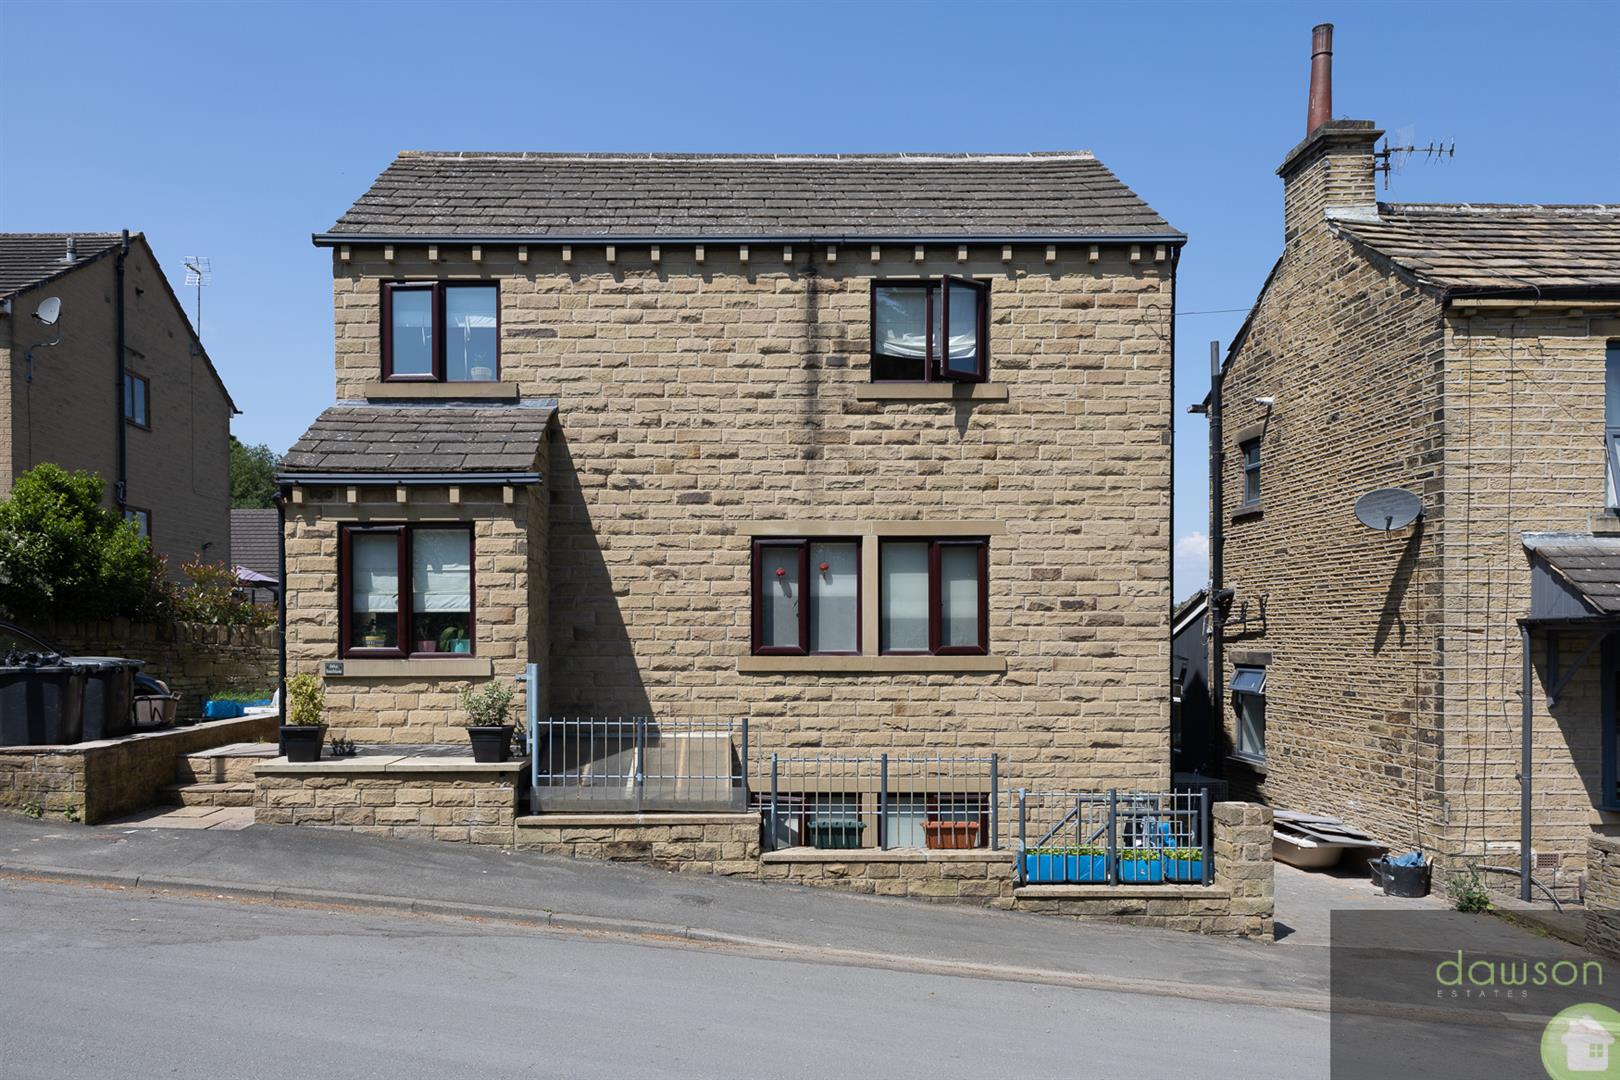 4 bed  for sale in South Lane, Elland, HX5 